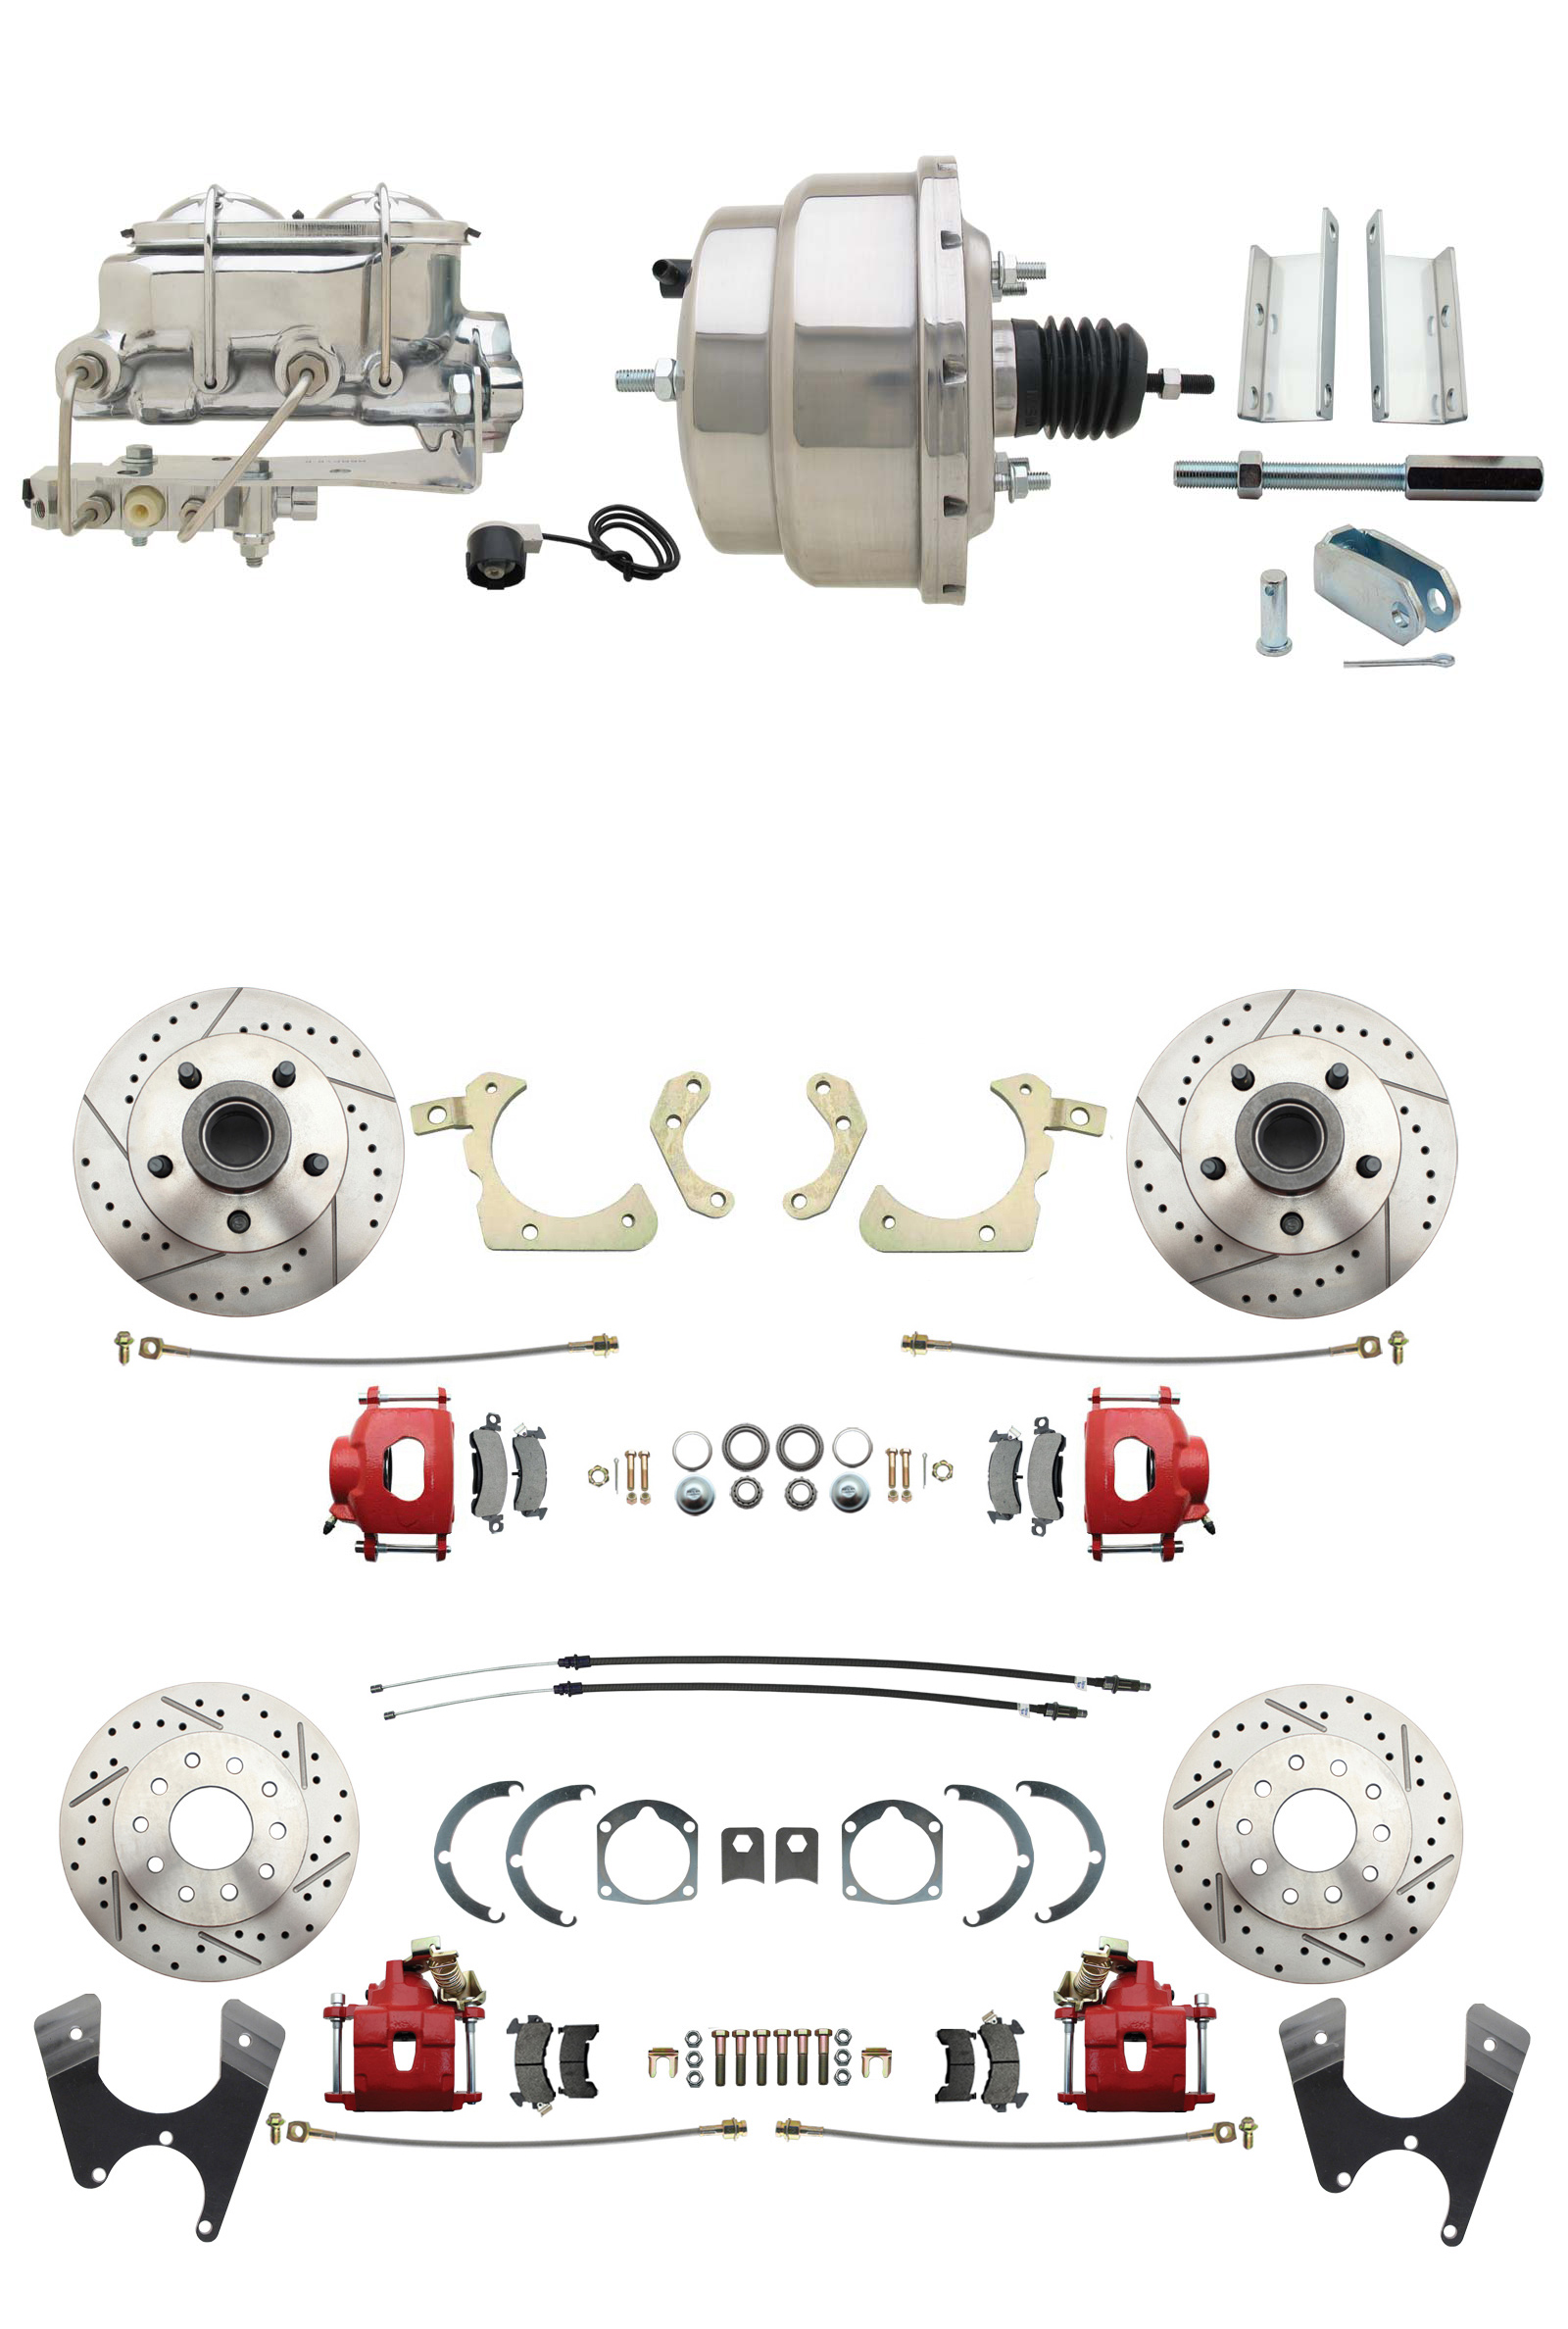 1955-1958 GM Full Size Front & Rear Power Disc Brake Kit Red Powder Coated Calipers Drilled/Slotted Rotors (Impala, Bel Air, Biscayne) & 8 Dual Chrome Booster Conversion Kit W/ Chrome Master Cylinder Bottom Mount Disc/